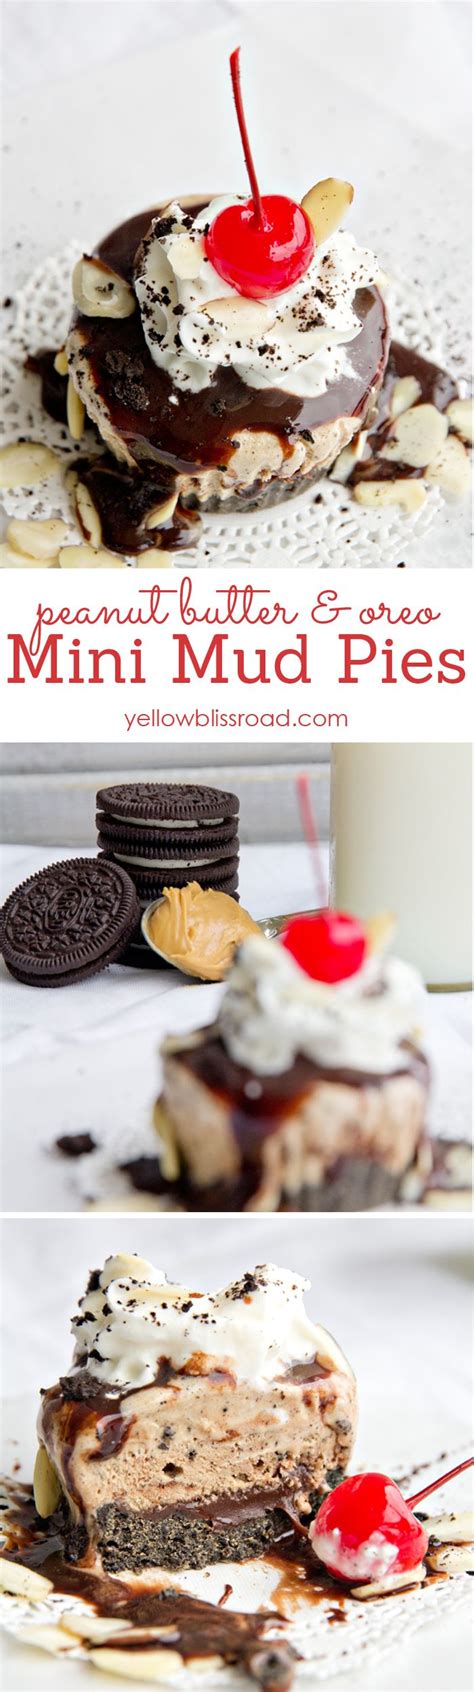 Mini Mud Pies With Peanut Butter And Chocolate Recipe Mud Pie Recipe Chocolate Mud Pie